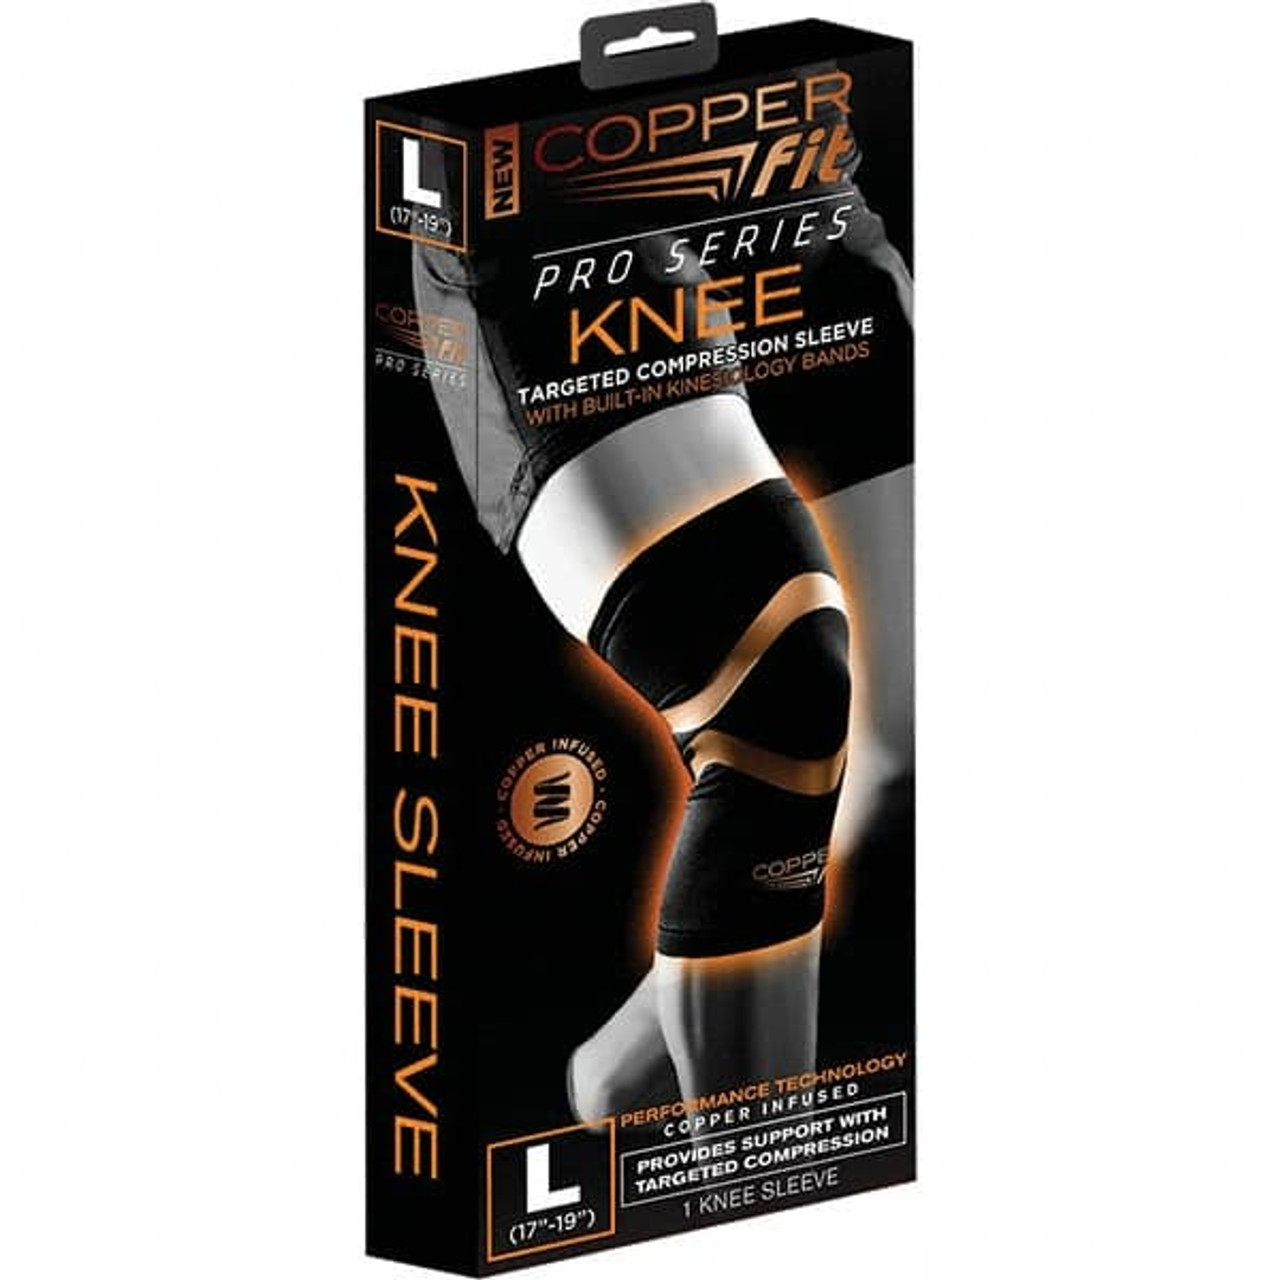 Copper Fit Knee Supports, Knee Style: Open, Style: Slip-On, Size: XX-Large,  Fits Knee Size (Inch): 21 - 24, Material: 85% Polyester,15% Spandex, Color:  Black CFPROKNXXL - 96714126 - Penn Tool Co., Inc